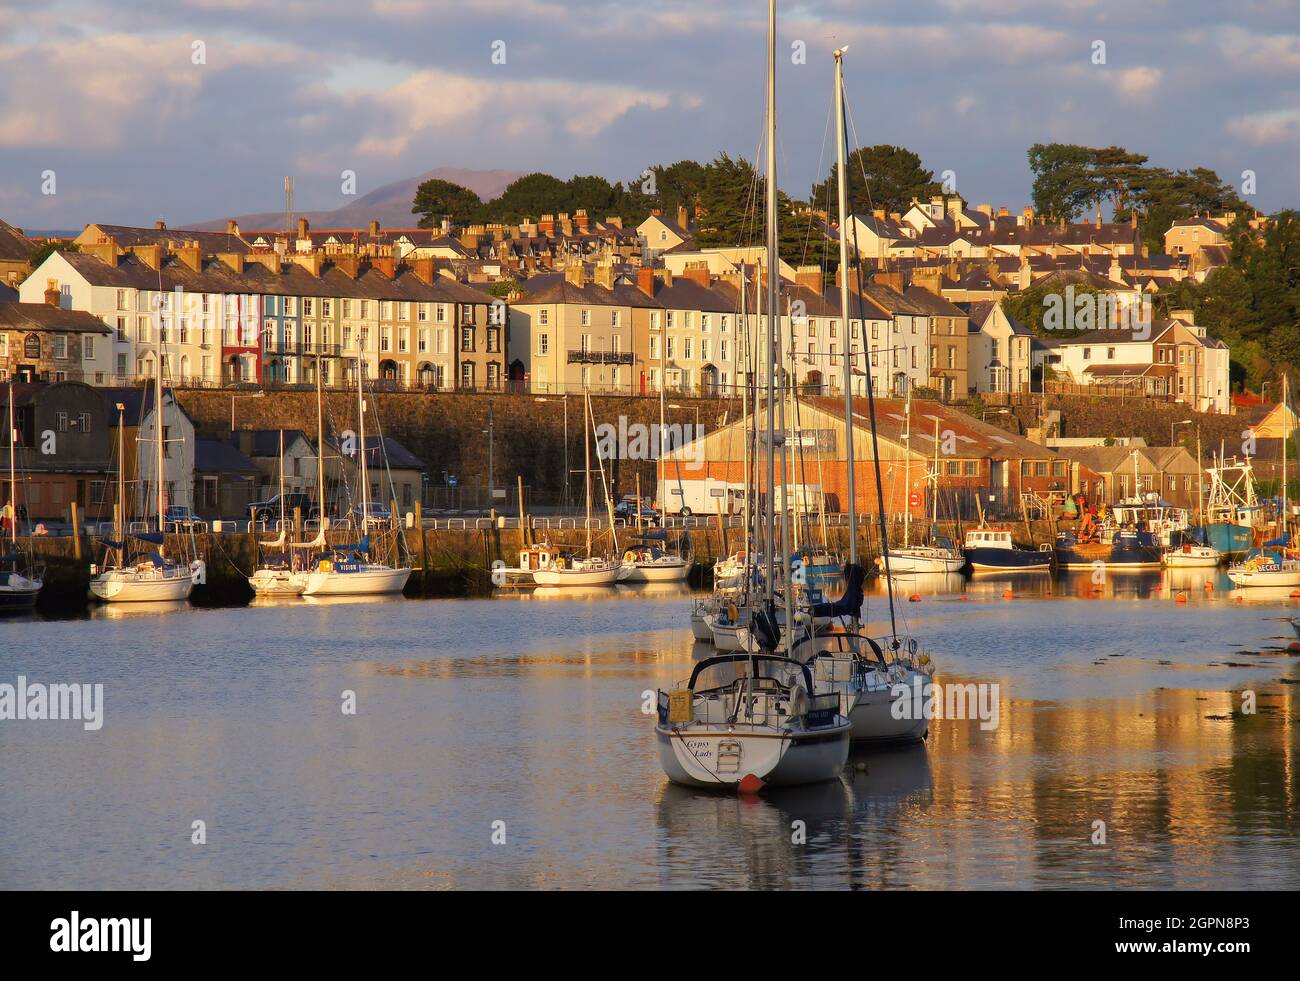 Boats in the harbour, reflections and colourful terrace houses along the River Seiont soon before sunset in Caernarfon, Gwynedd, Wales Stock Photo